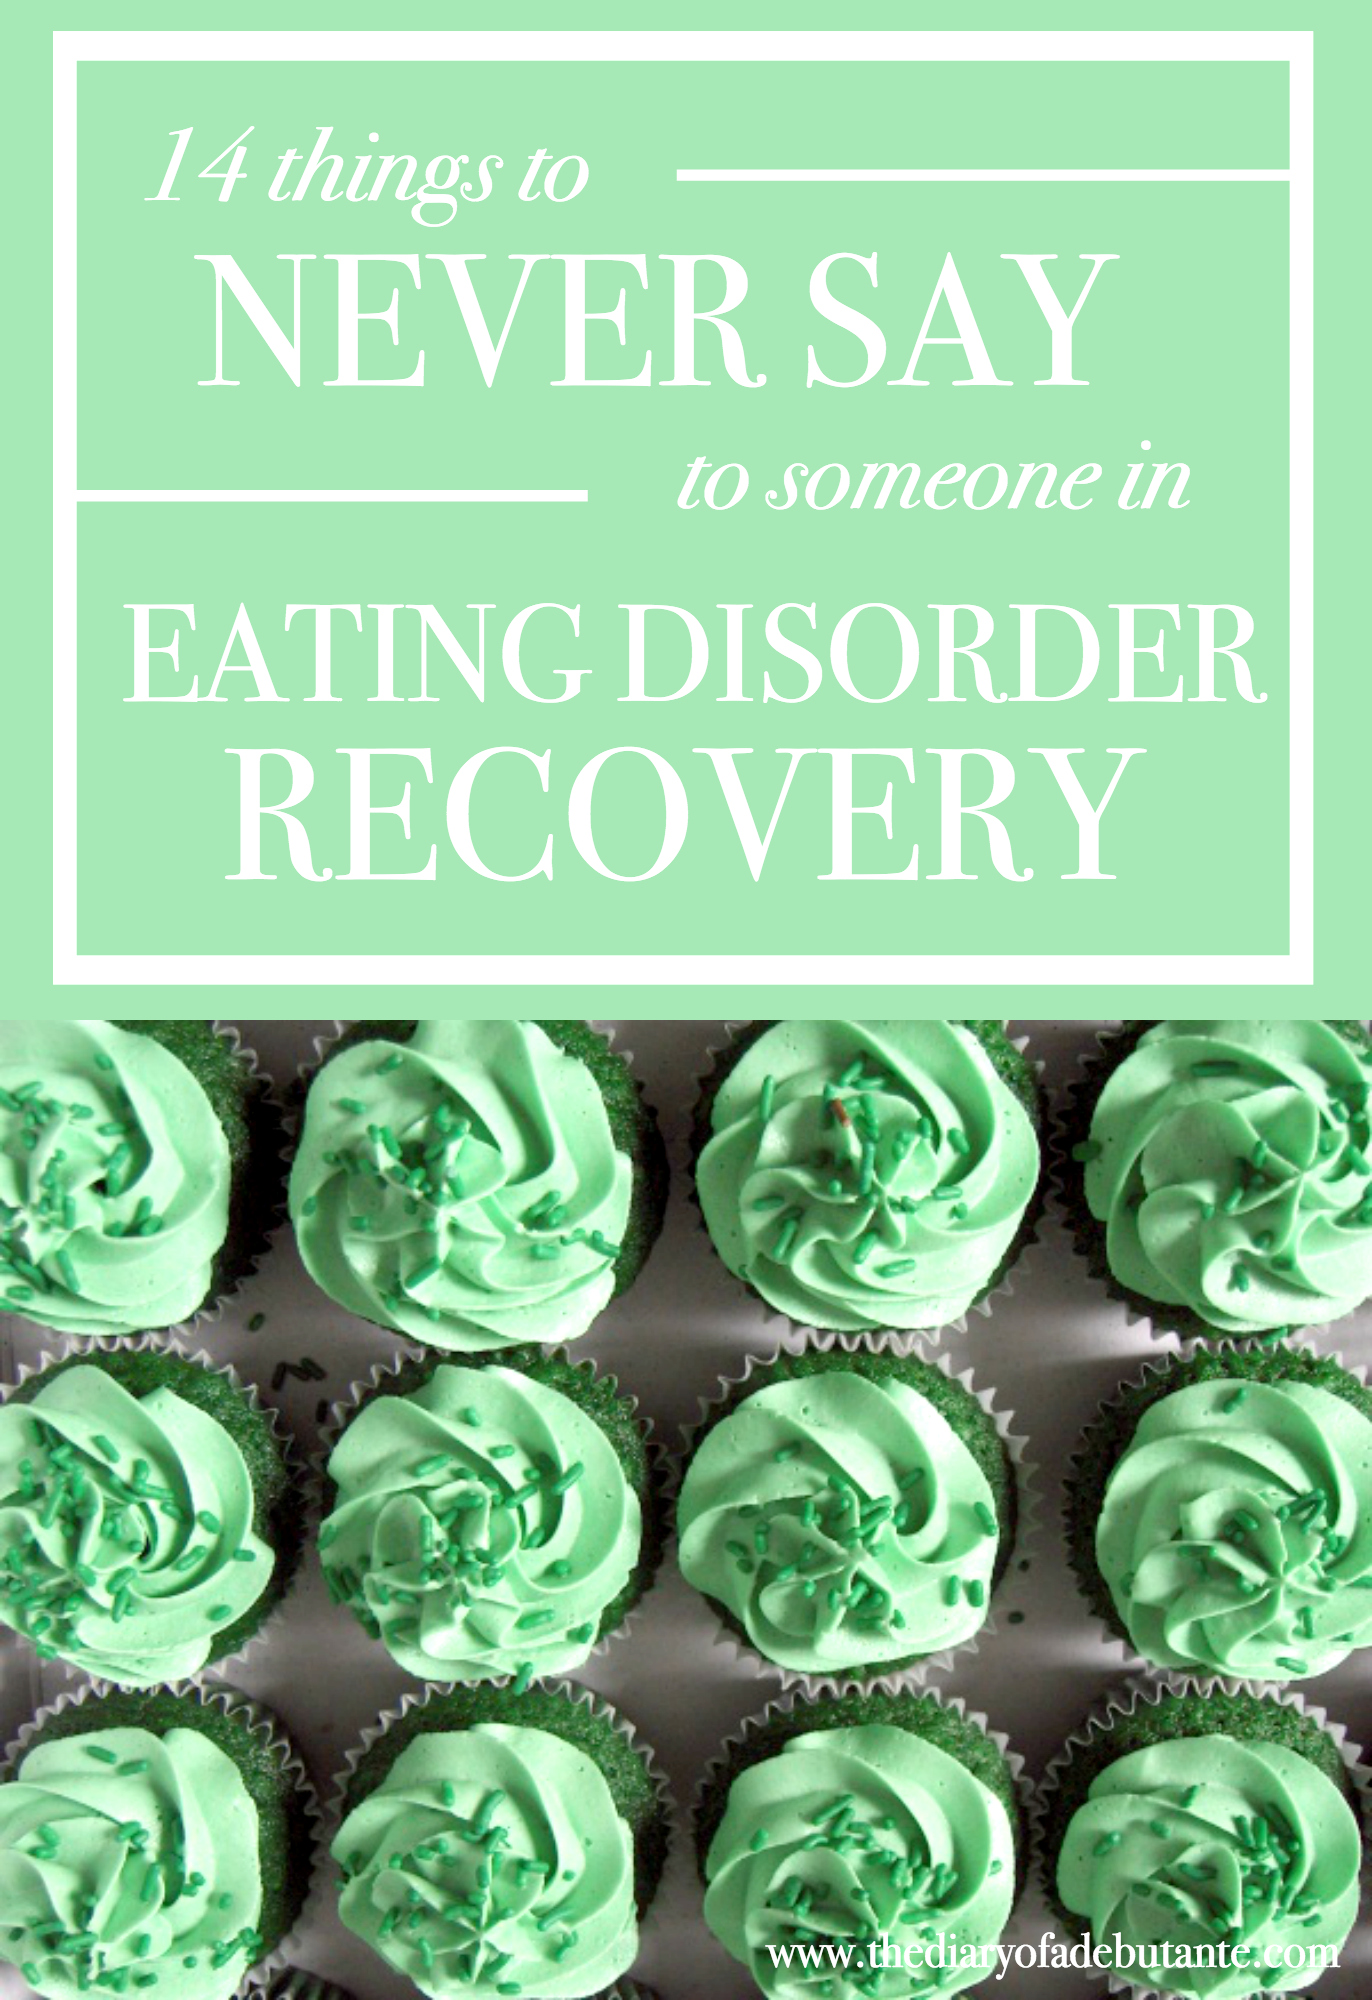 things to never say, information about eating disorders, things to not say to a loved one in eating disorder recovery, things to not to say, eating disorders, eating disorder recovery, Stephanie Ziajka, Diary of a Debutante